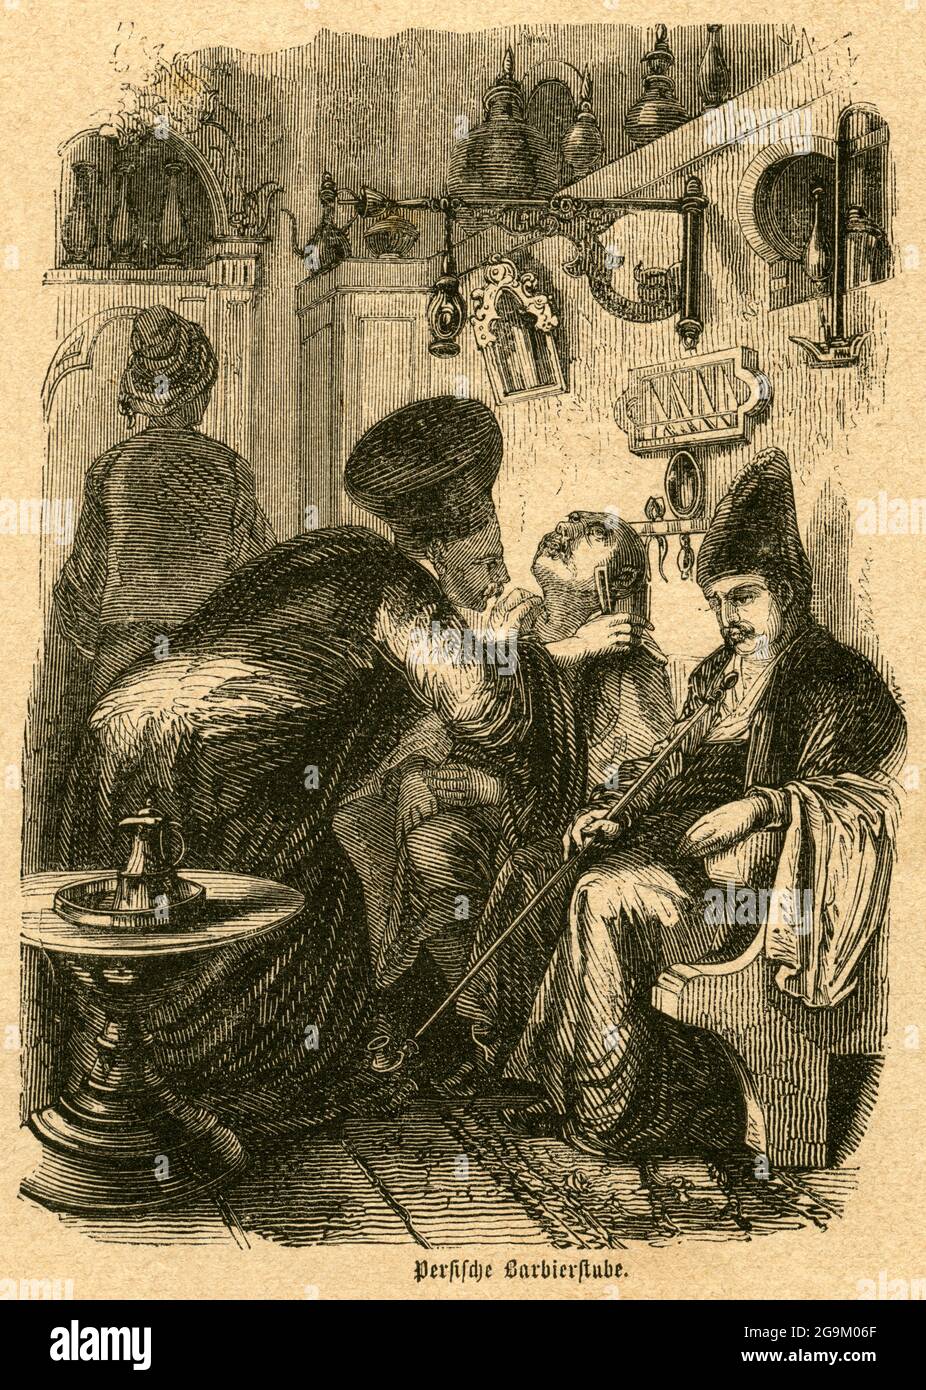 Europe, Germany, Persian barbershop, wood engraving from an newspaper, propably around 1860th , ADDITIONAL-RIGHTS-CLEARANCE-INFO-NOT-AVAILABLE Stock Photo